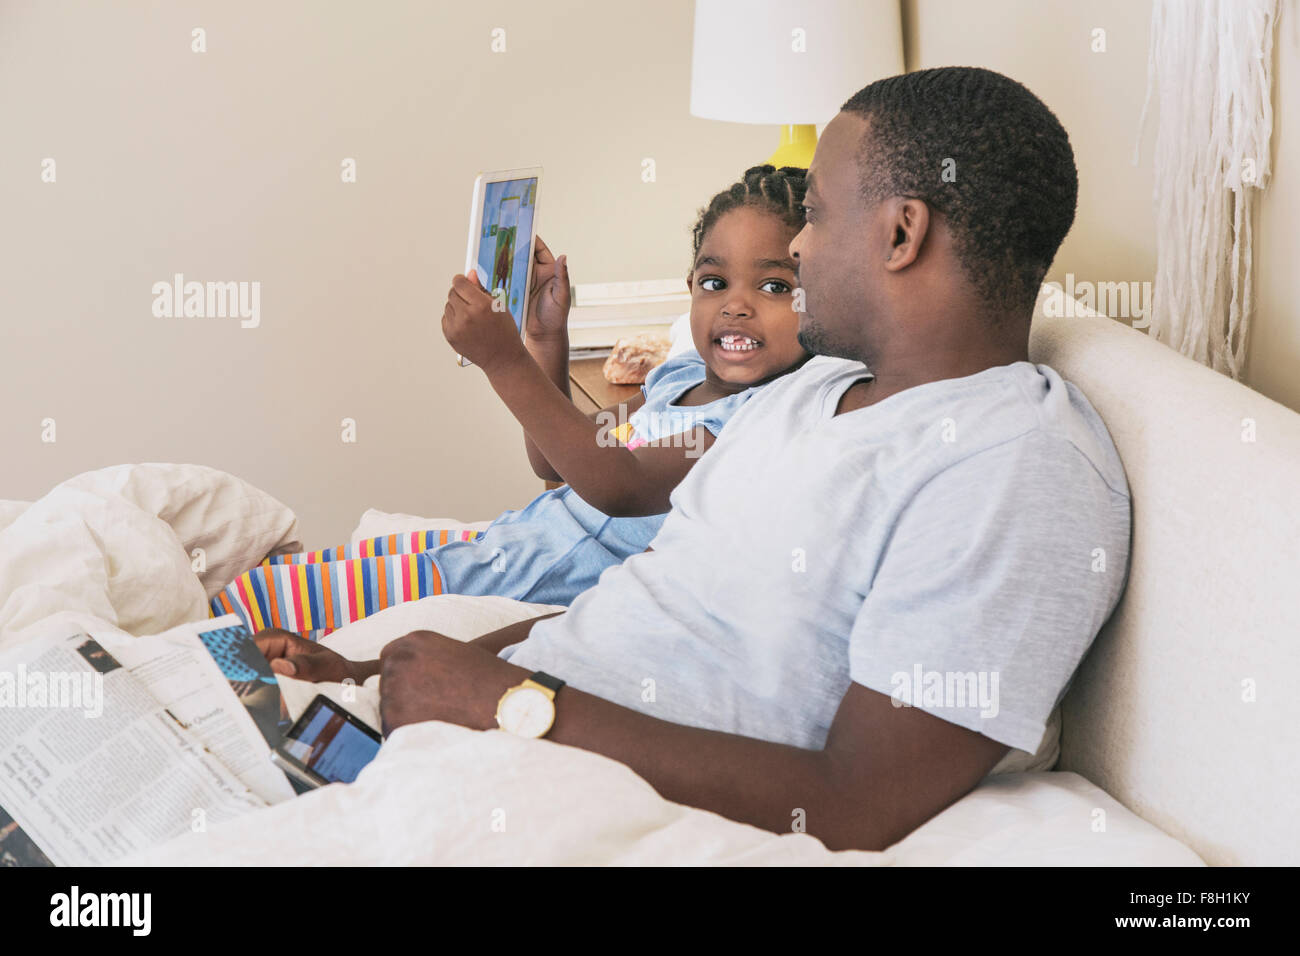 African American father and daughter sitting on bed Banque D'Images